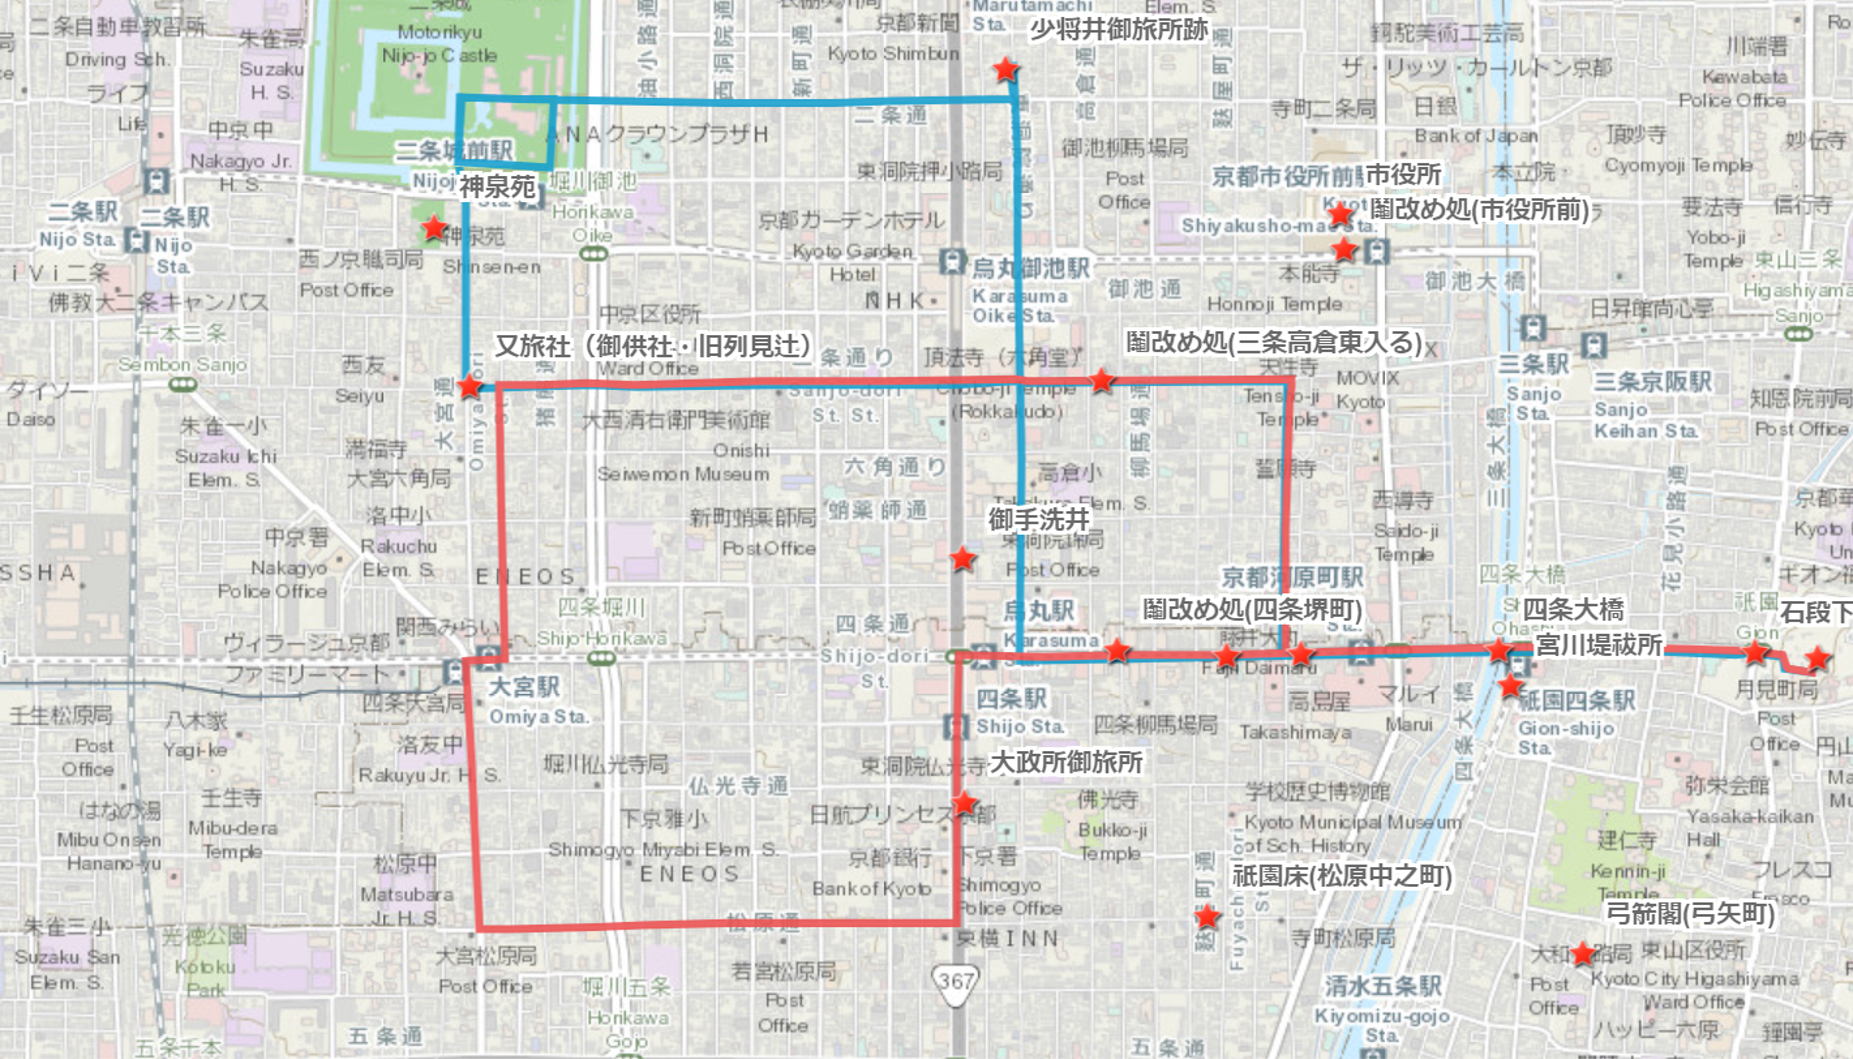 Mikoshi Togyo route in the medieval and early modern period